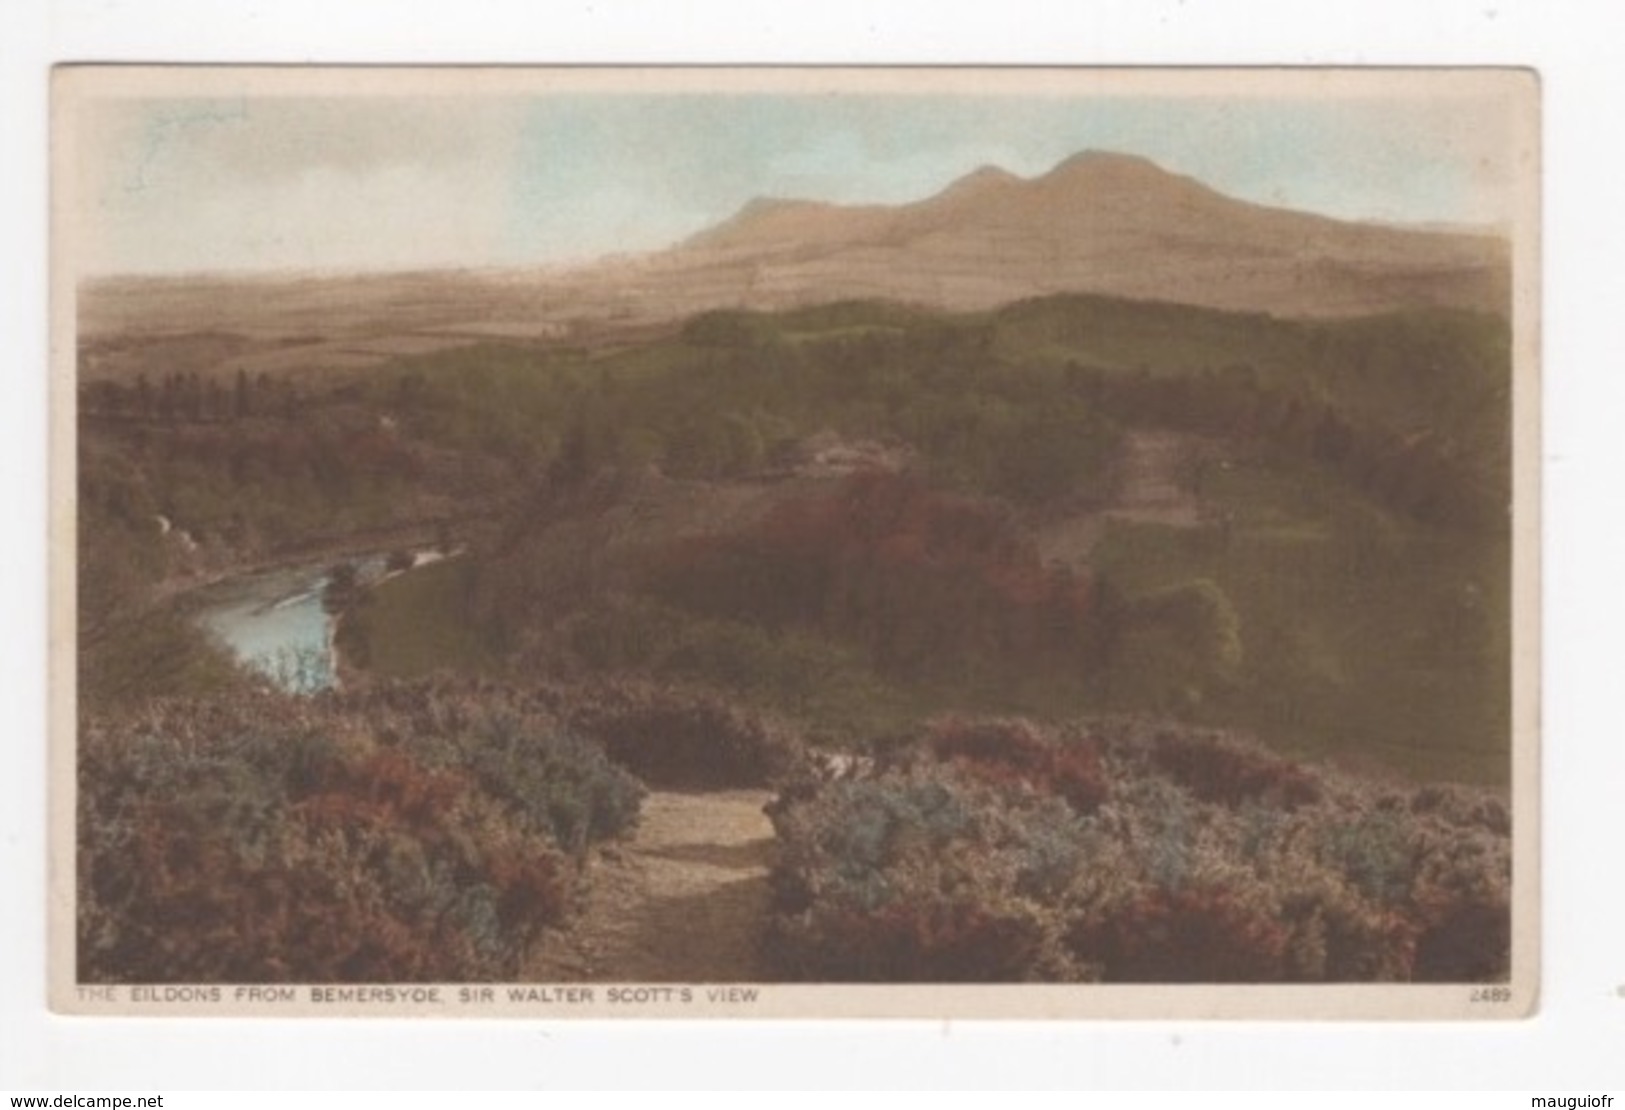 DF / ROYAUME-UNI / ECOSSE / ROXBURGSHIRE / THE EILDONS FROM BEMERSYDE / SIR WALTER SCOTT'S VIEW - Roxburghshire